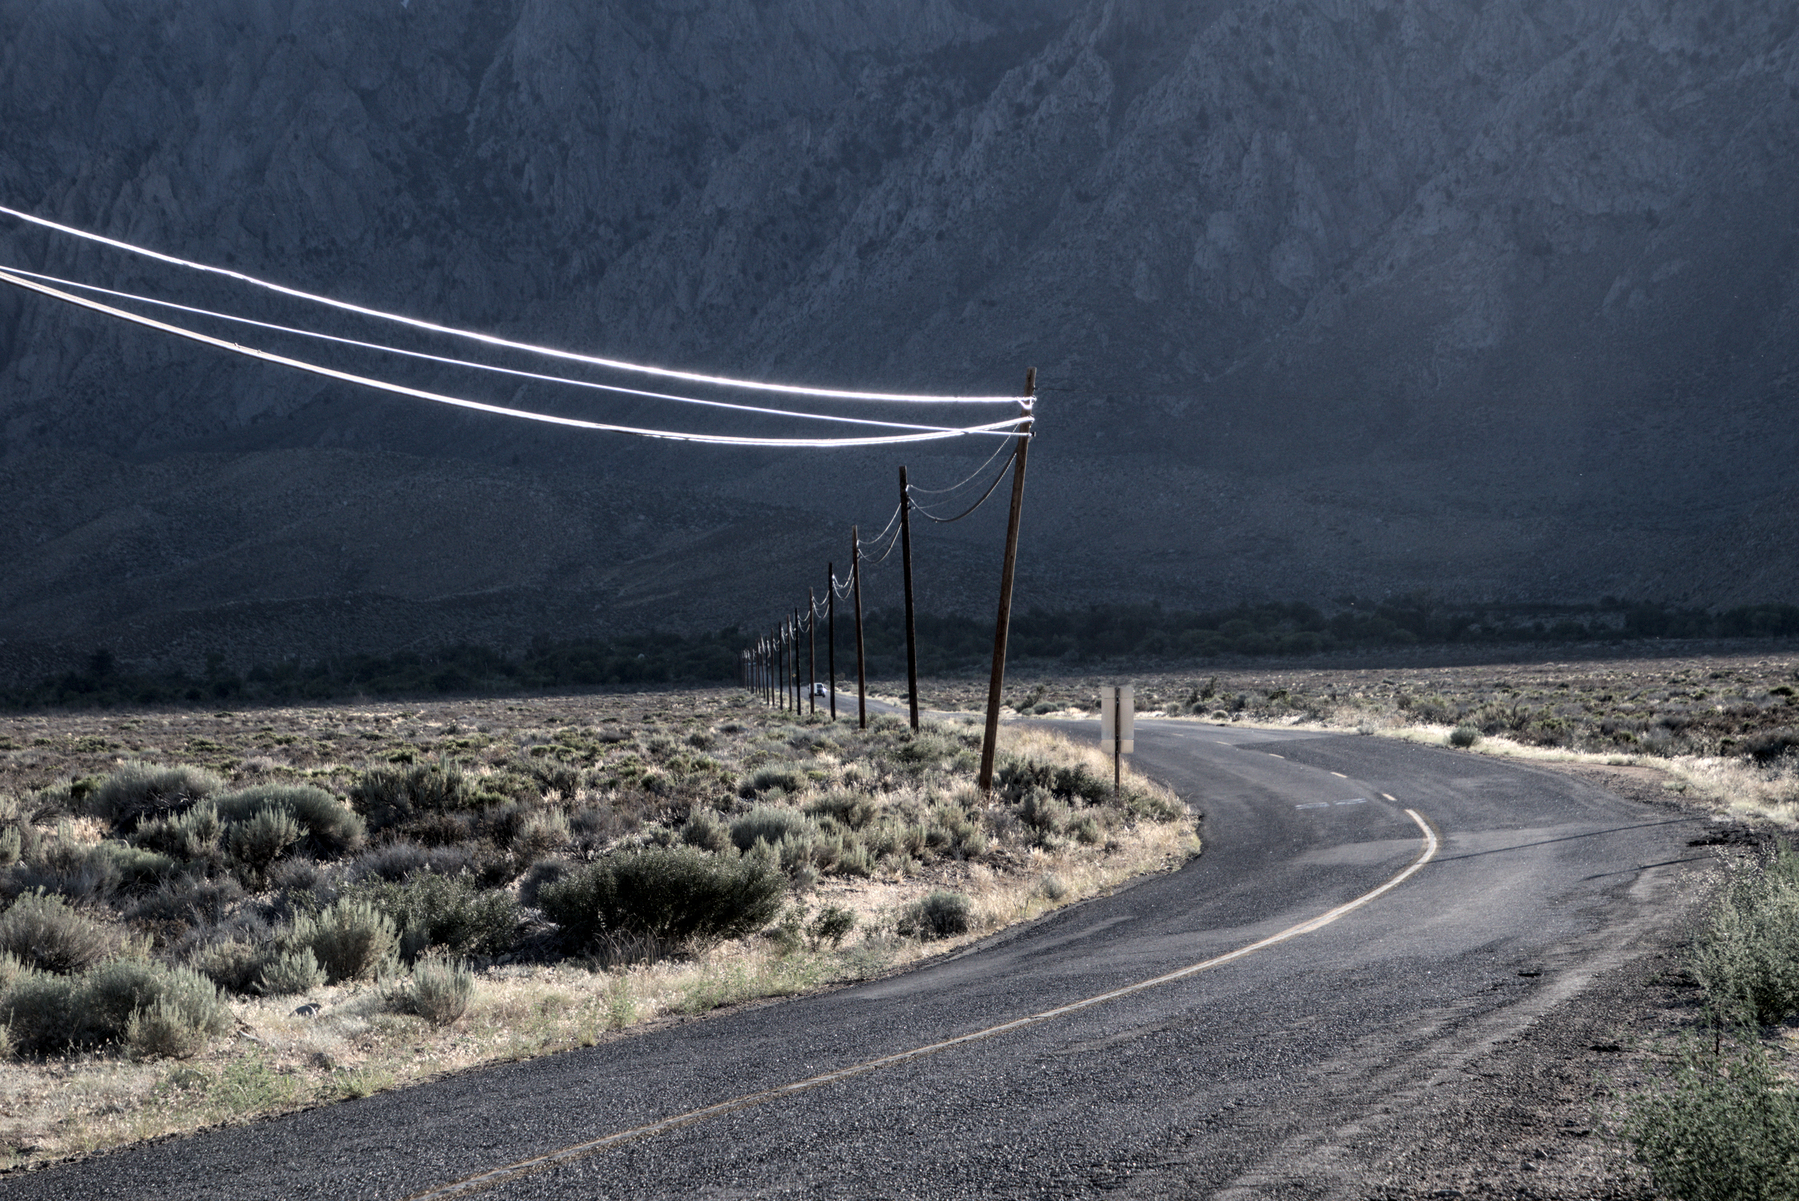 A road in the high desert banks to the left before it heads west up into a mountain canyon. The mountains in the background are in deep shadow, but the road is lit by the late afternoon sun.  The lines on the utility poles on the south side of the road reflect the sun brightly, echoing the turn in the road.